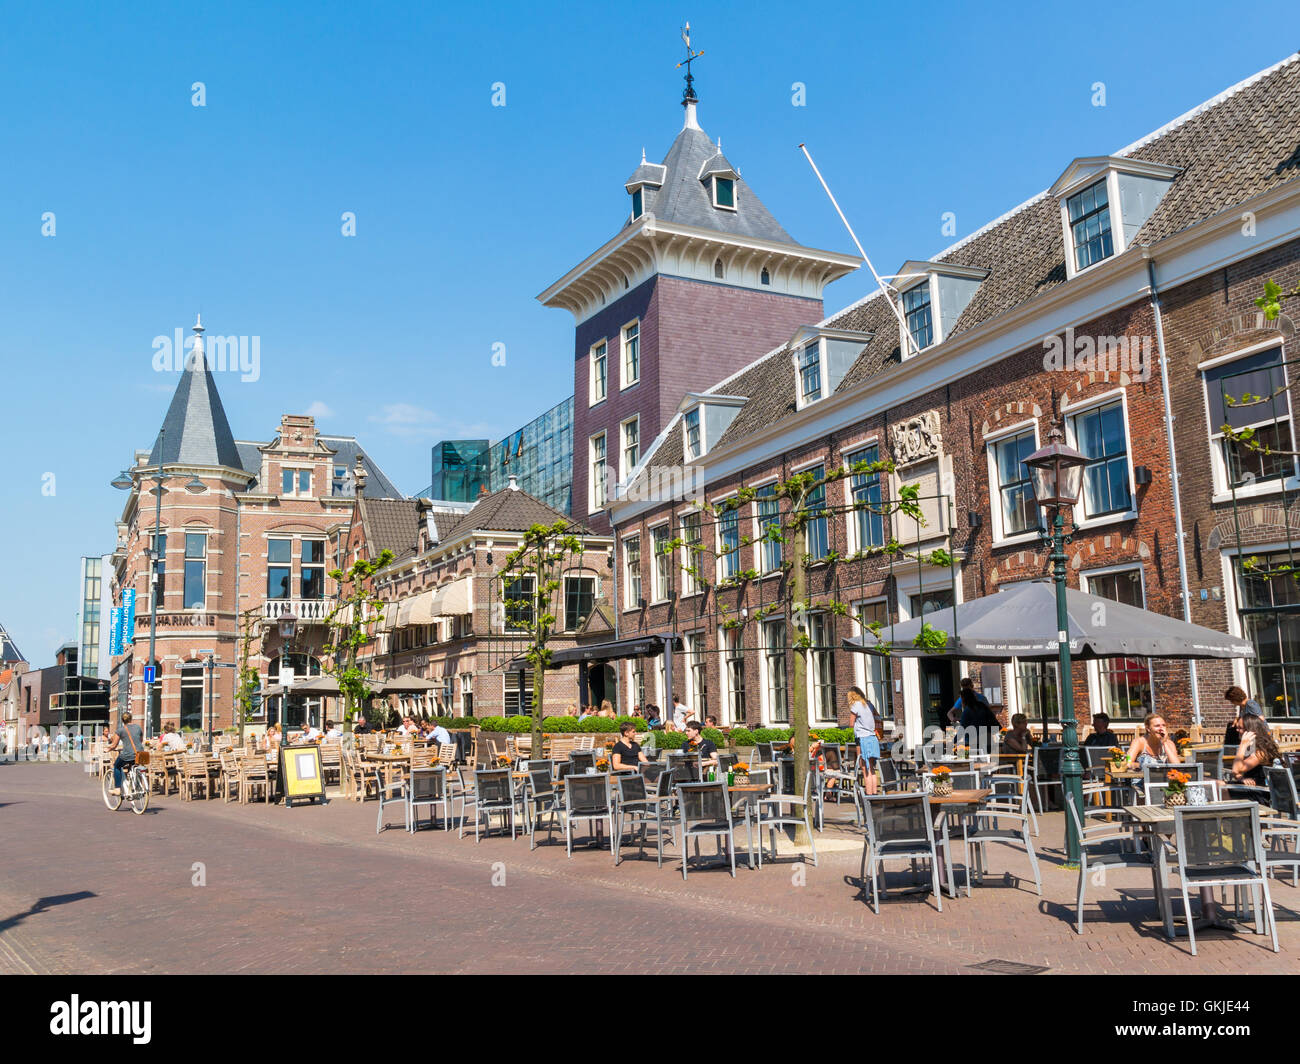 Klokhuisplein square with sidewalk cafe and people in old town of Haarlem, Holland, Netherlands Stock Photo